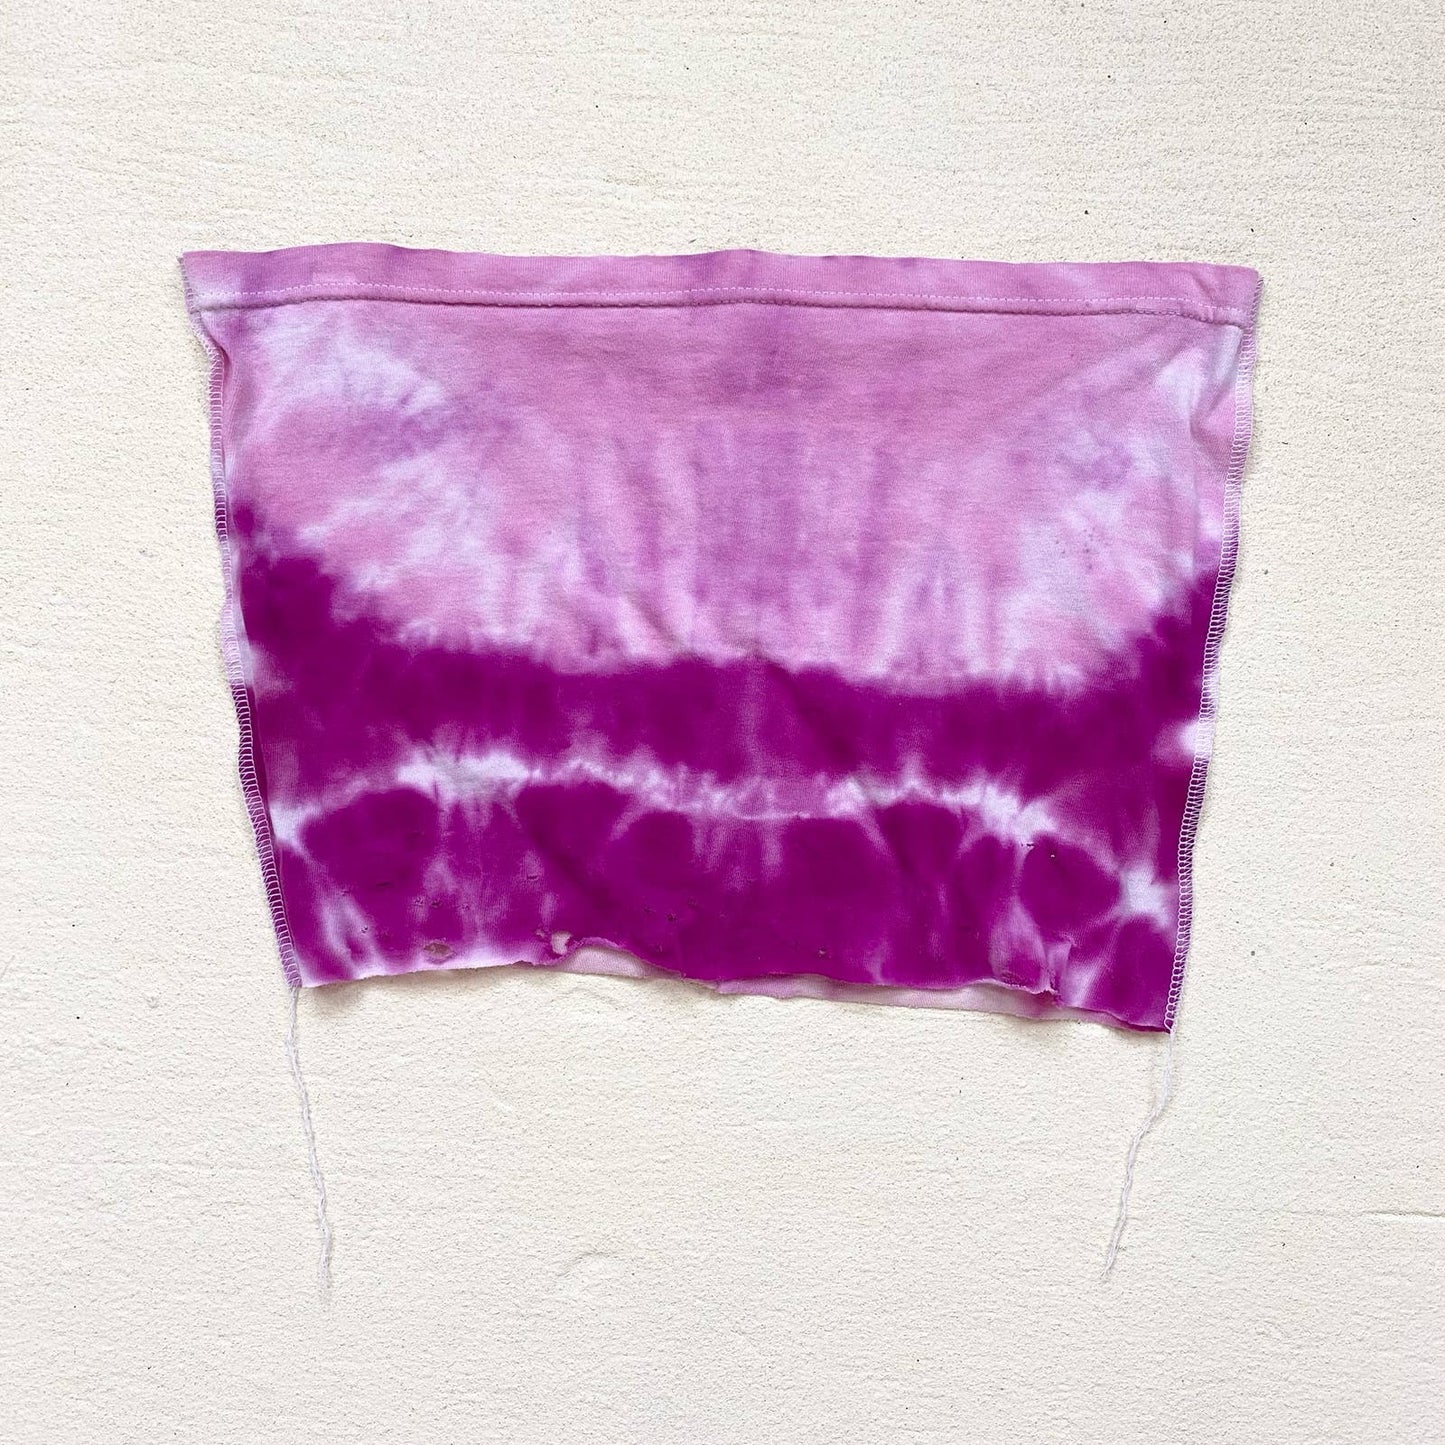 Scrap Fabric Distressed Pink Tie Dye Crop Tube Top, Size Large